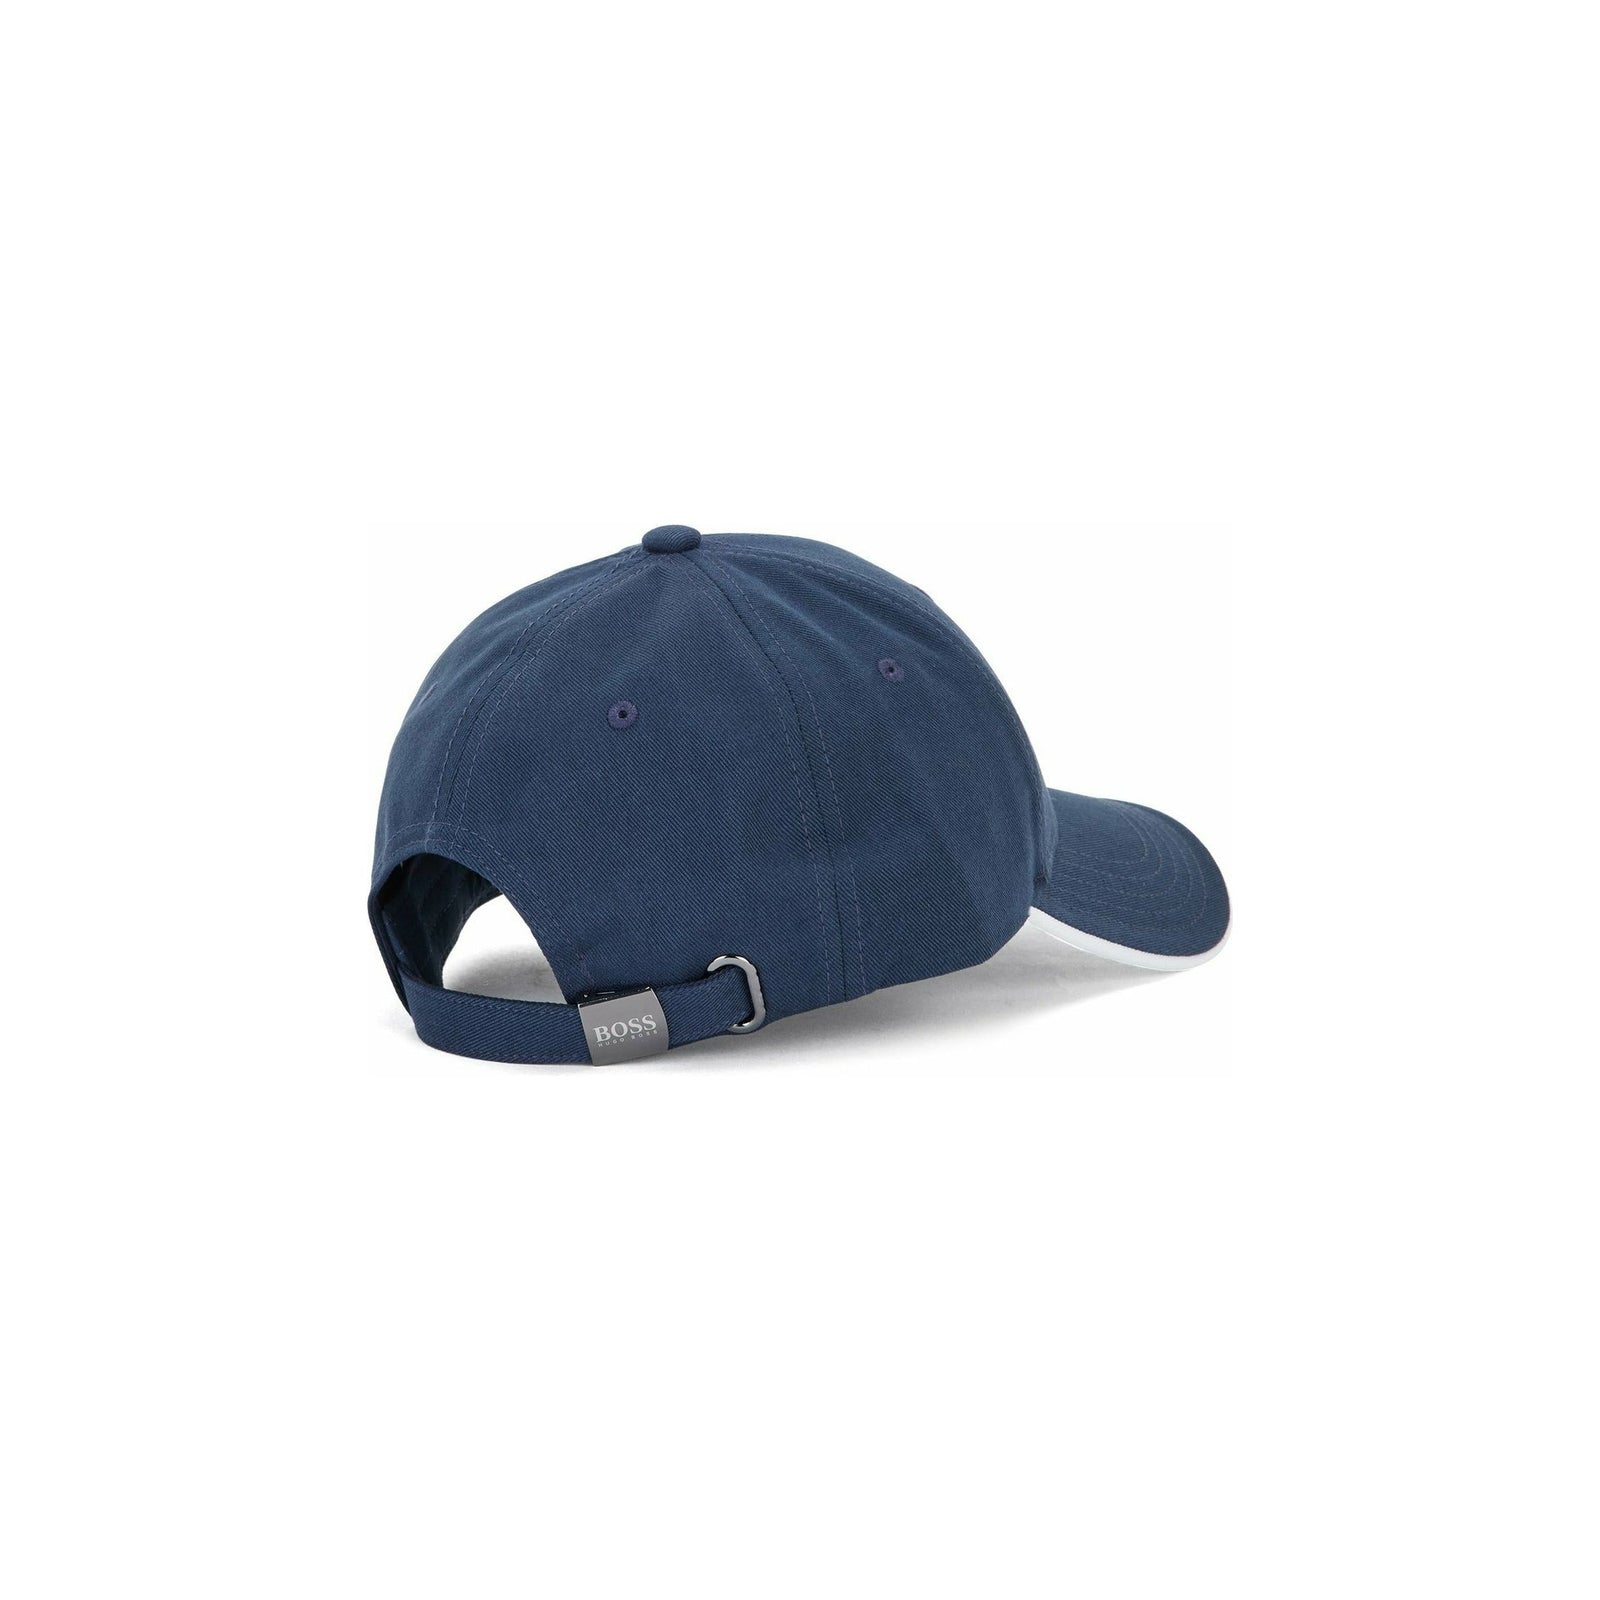 LOGO-PRINT CAP IN COTTON TWILL WITH CONTRAST ACCENTS - Yooto